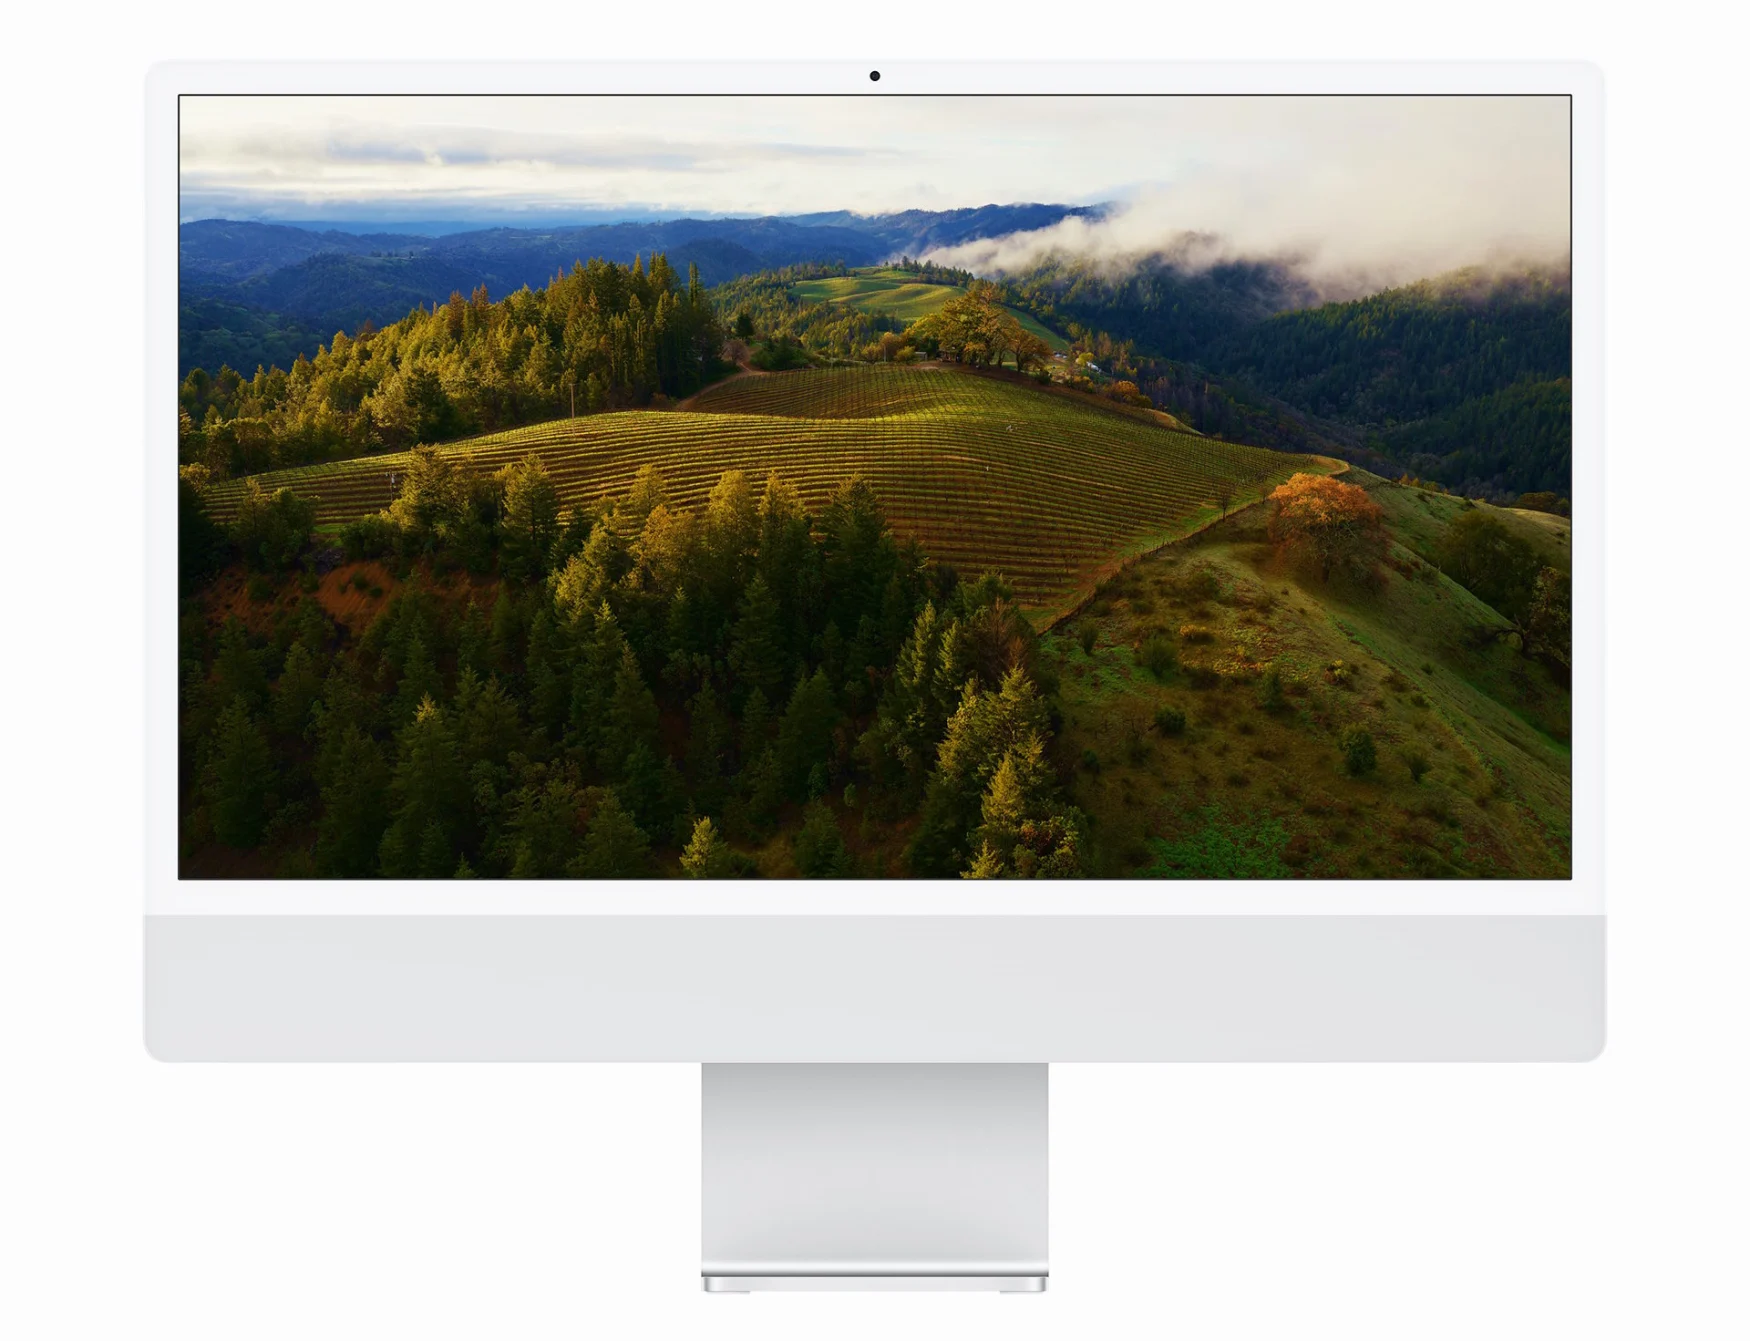 macOS Sonoma wallpaper on your iMac